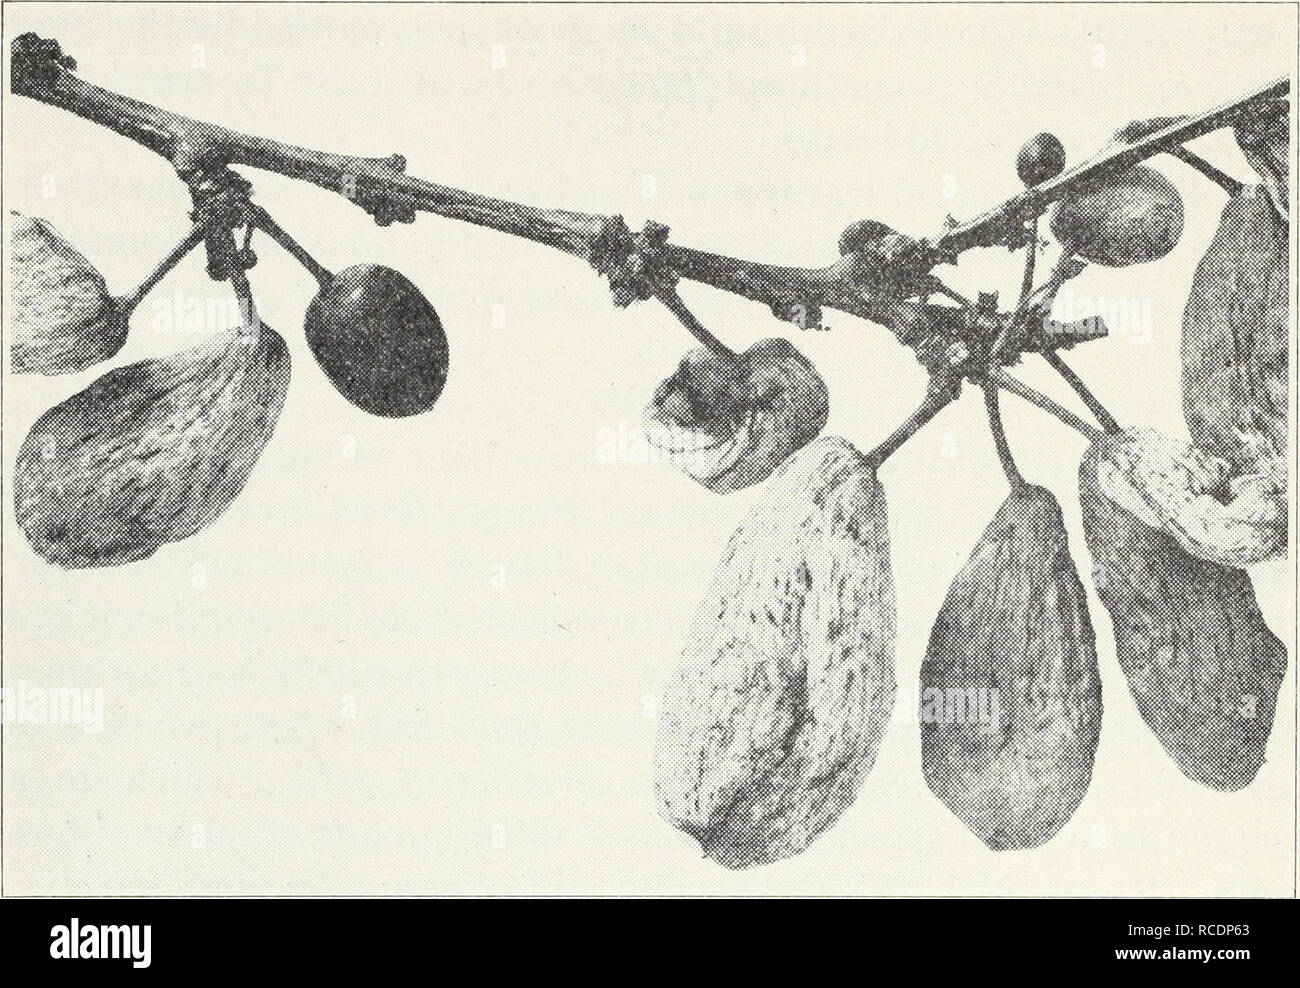 . Diseases of flowers and other ornamentals. Flowers; Plant diseases. 58 California Agricultural Extension Service [Cir. 118 Brown Rot.—This fungus disease, caused by Sclerotinia fructicola or 8. laxa, occurs as a blossom and twig blight on Prunus tomentosa, P. mume, and other species, and as a fruit rot on P. cerasifera, P. subcor- data, and P. ilicifolia. In the blossom-blight phase of the disease, the blossoms are blasted and withered just as they are opening, and a gray- ish mold can be seen on the dead parts. Killing of the tissue runs down into the twigs and drops of gum ooze out. In the Stock Photo